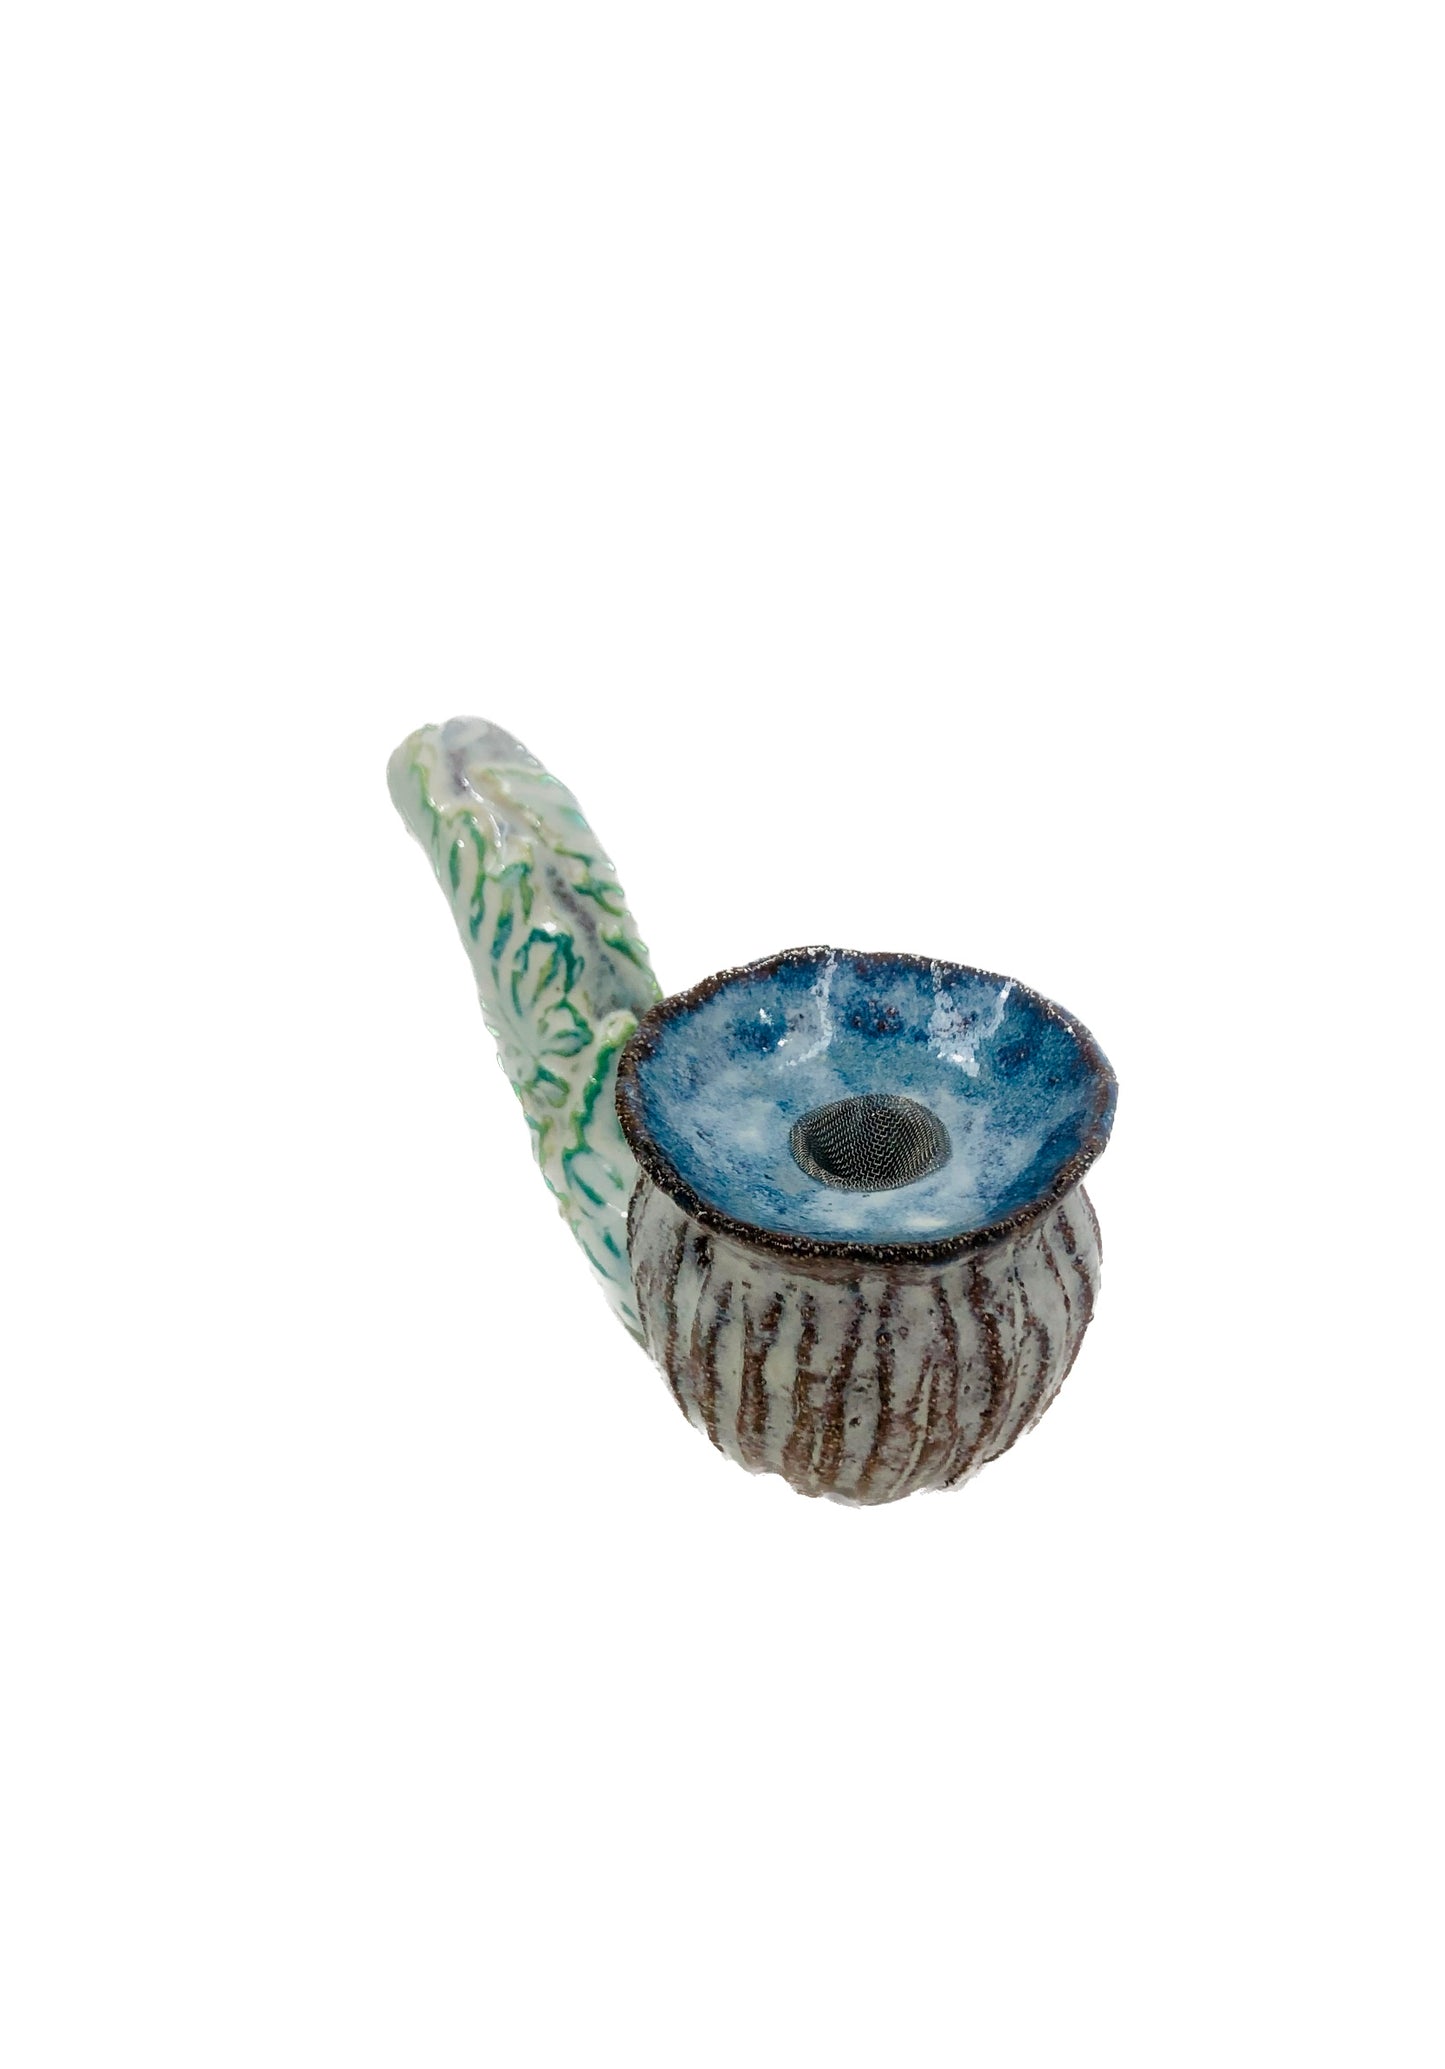 Poppy Seed Head Pipe ✨ 50% off at checkout